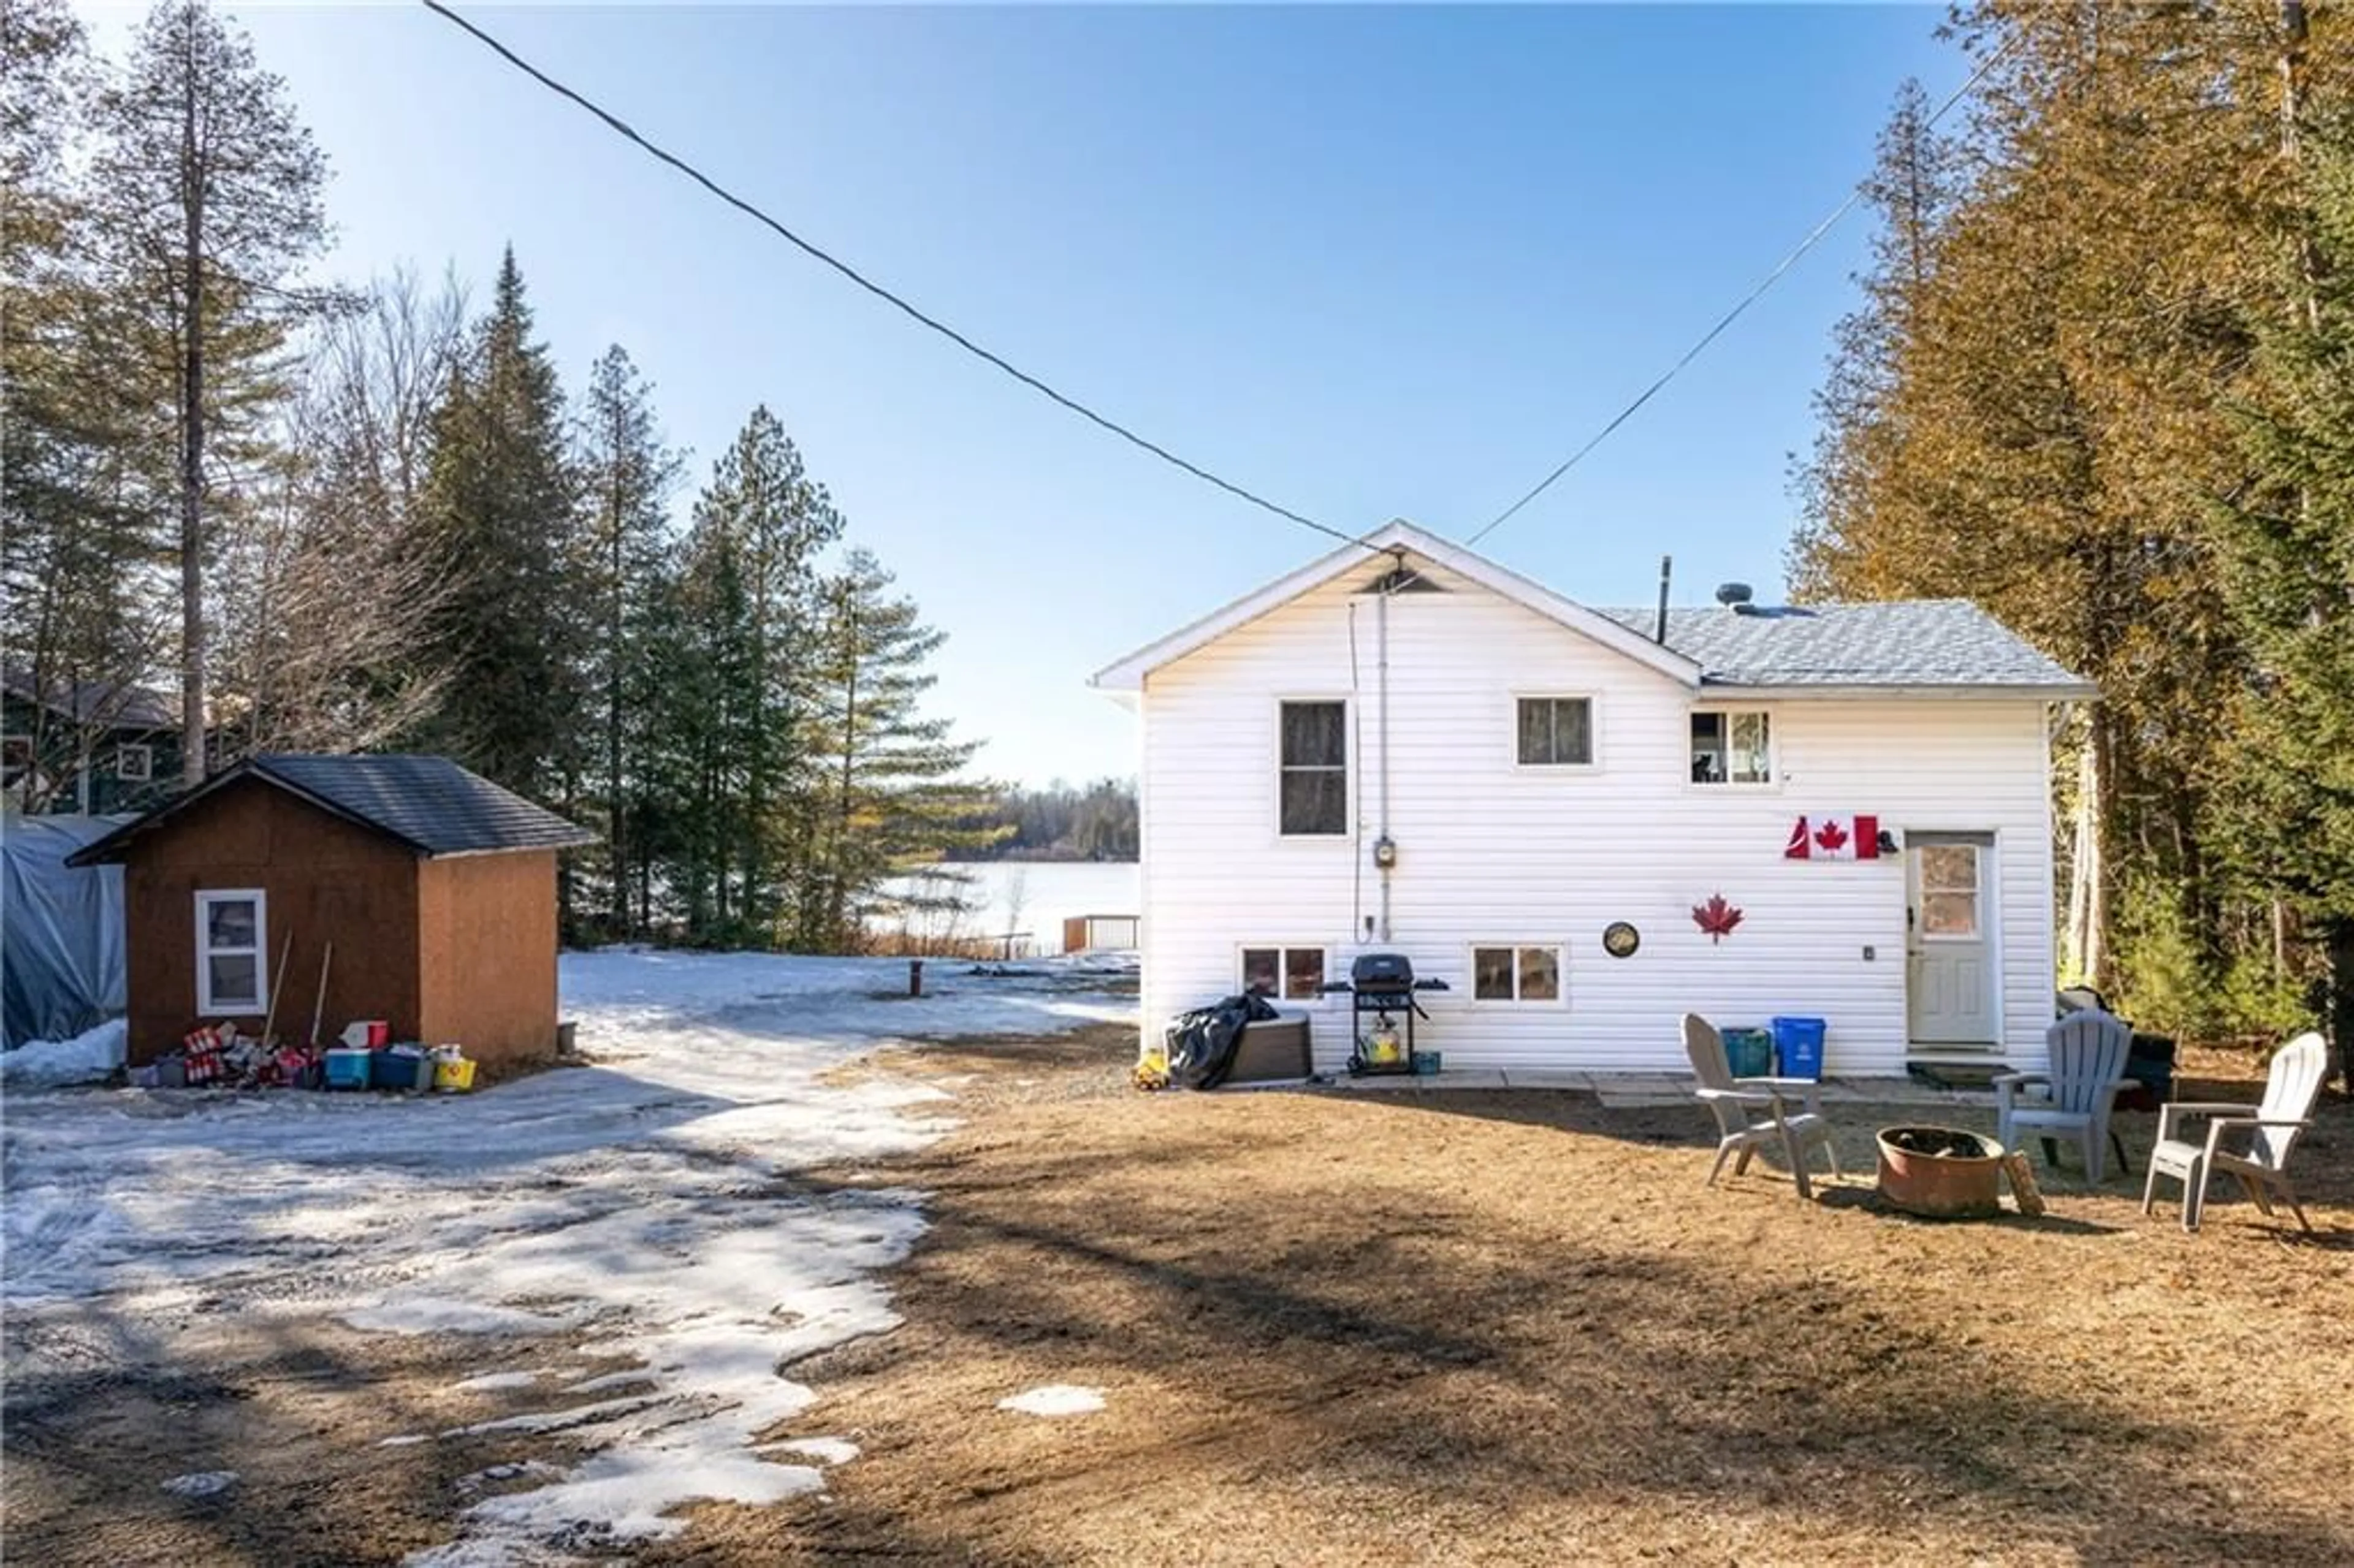 Cottage for 1039A Hills Lake Rd, Plevna Ontario K0H 2M0